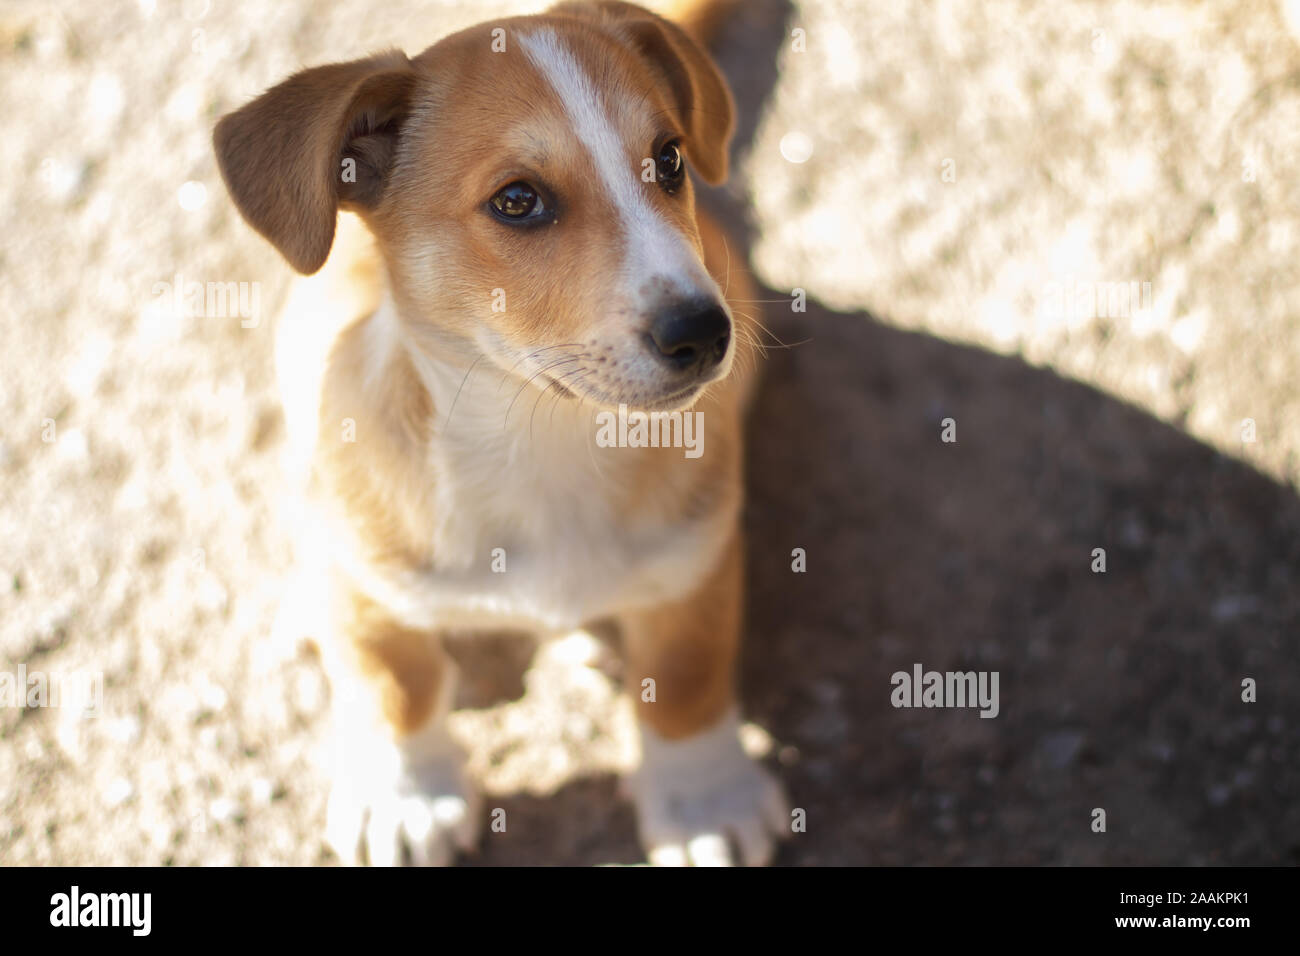 Dog with brown fur and cute eyes and big ears. Stock Photo